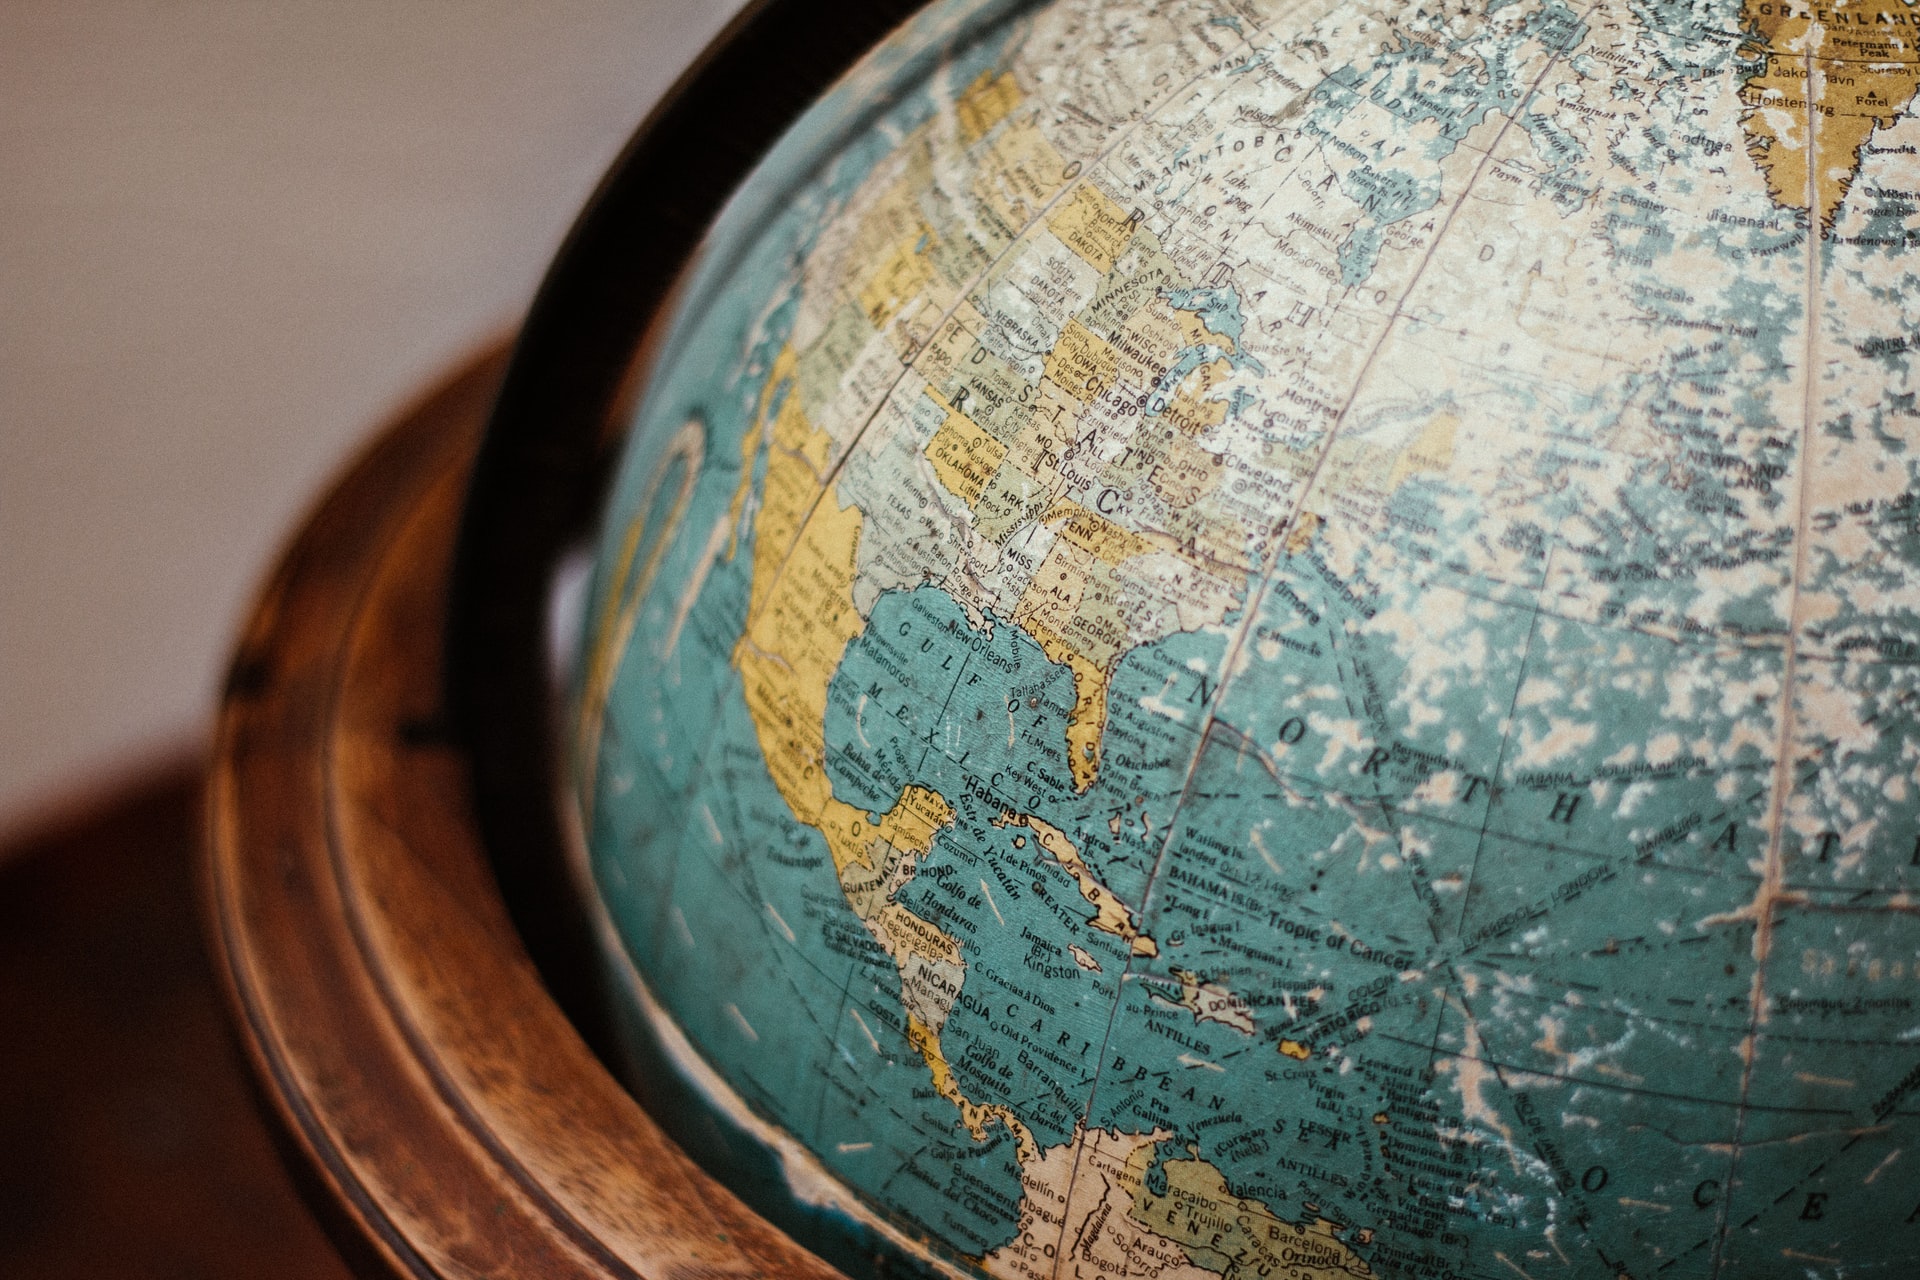 How an International Partnership Could Benefit Your Church